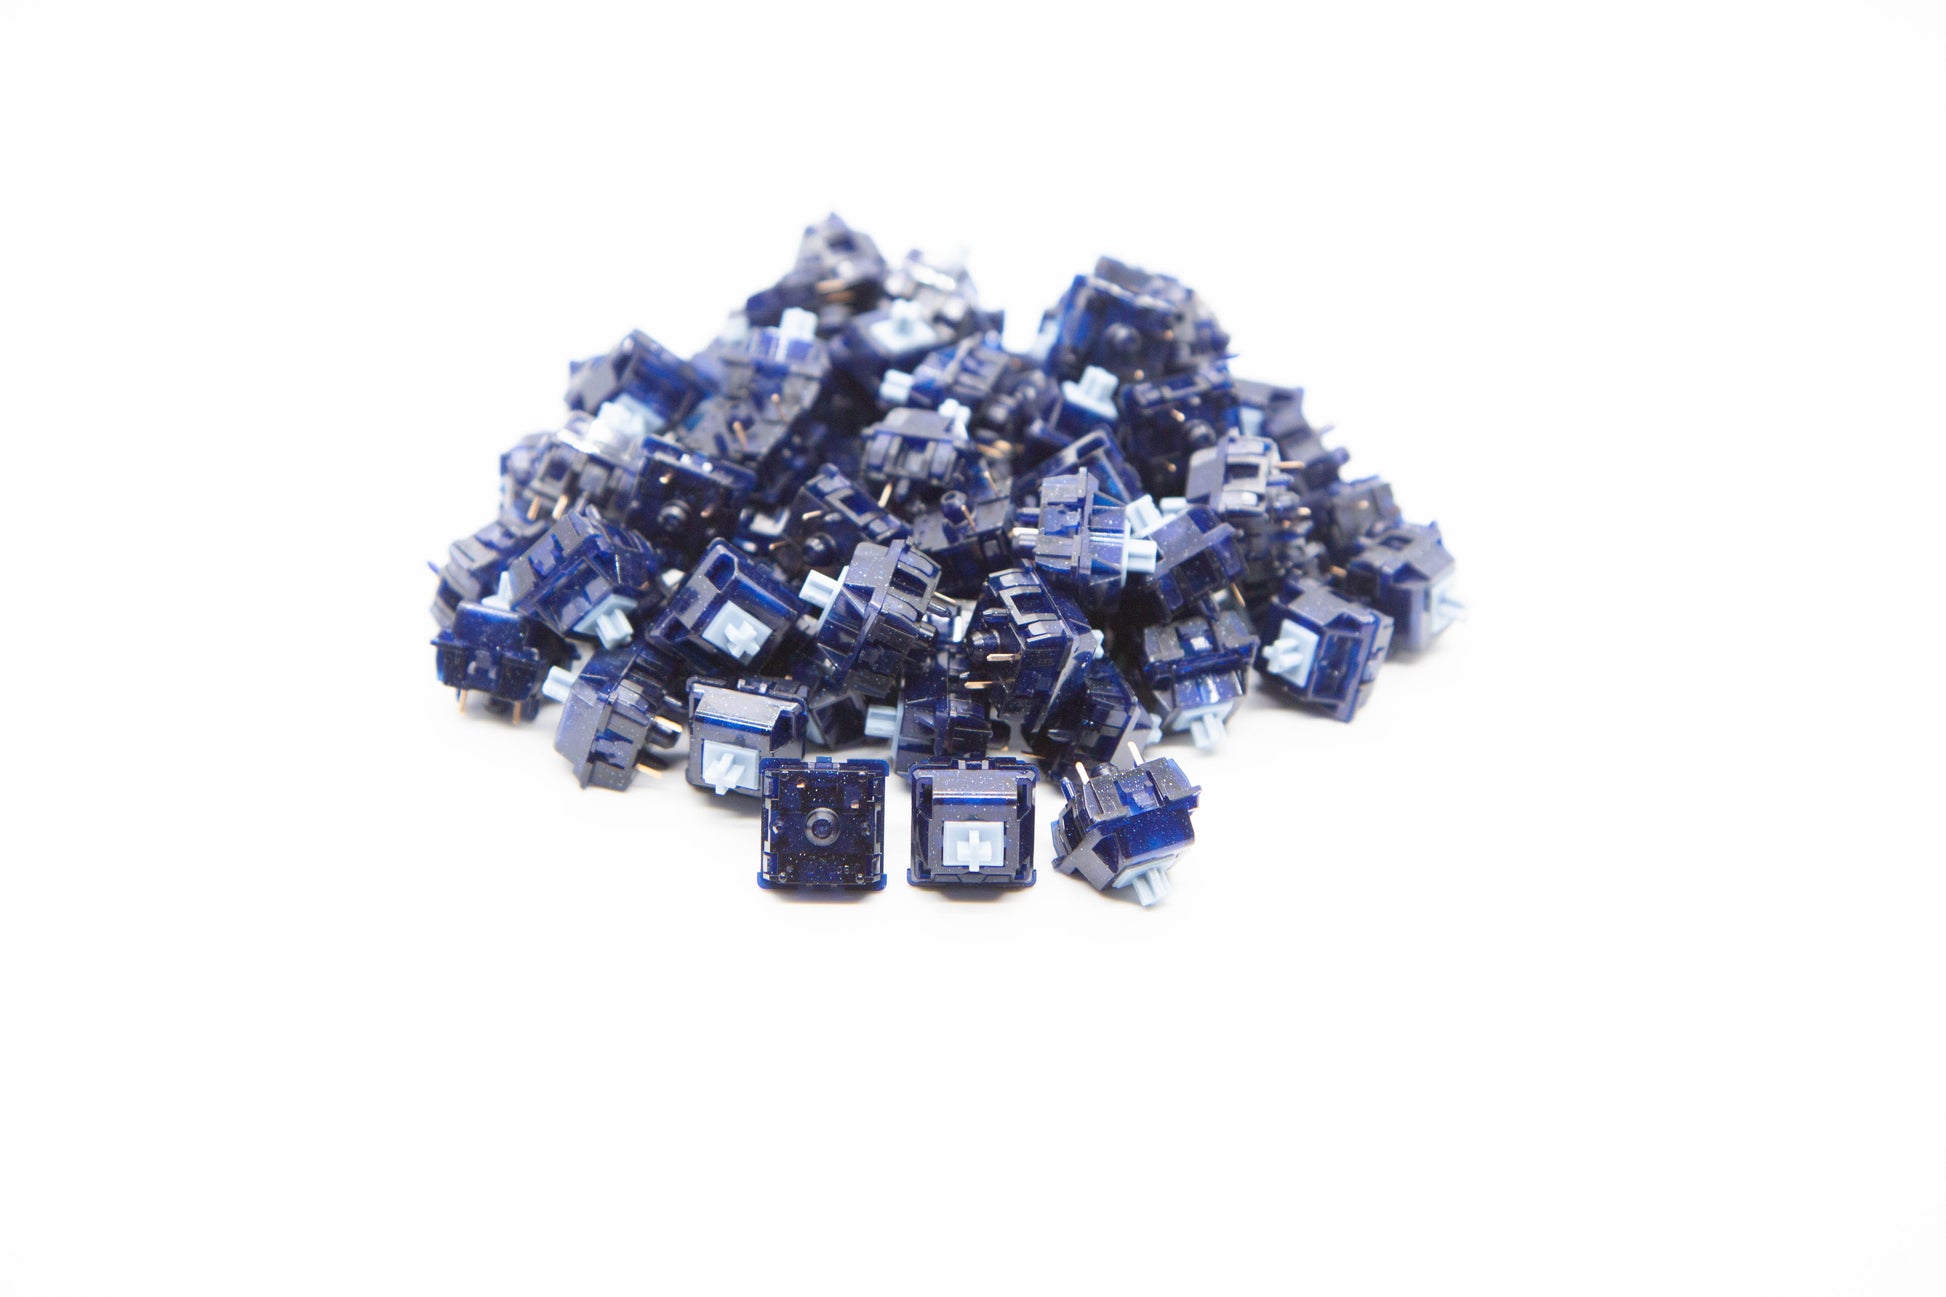 Close-up shot of a pile of Hoshizora mechanical keyboard switches featuring dark blue galaxy housing and baby blue stems